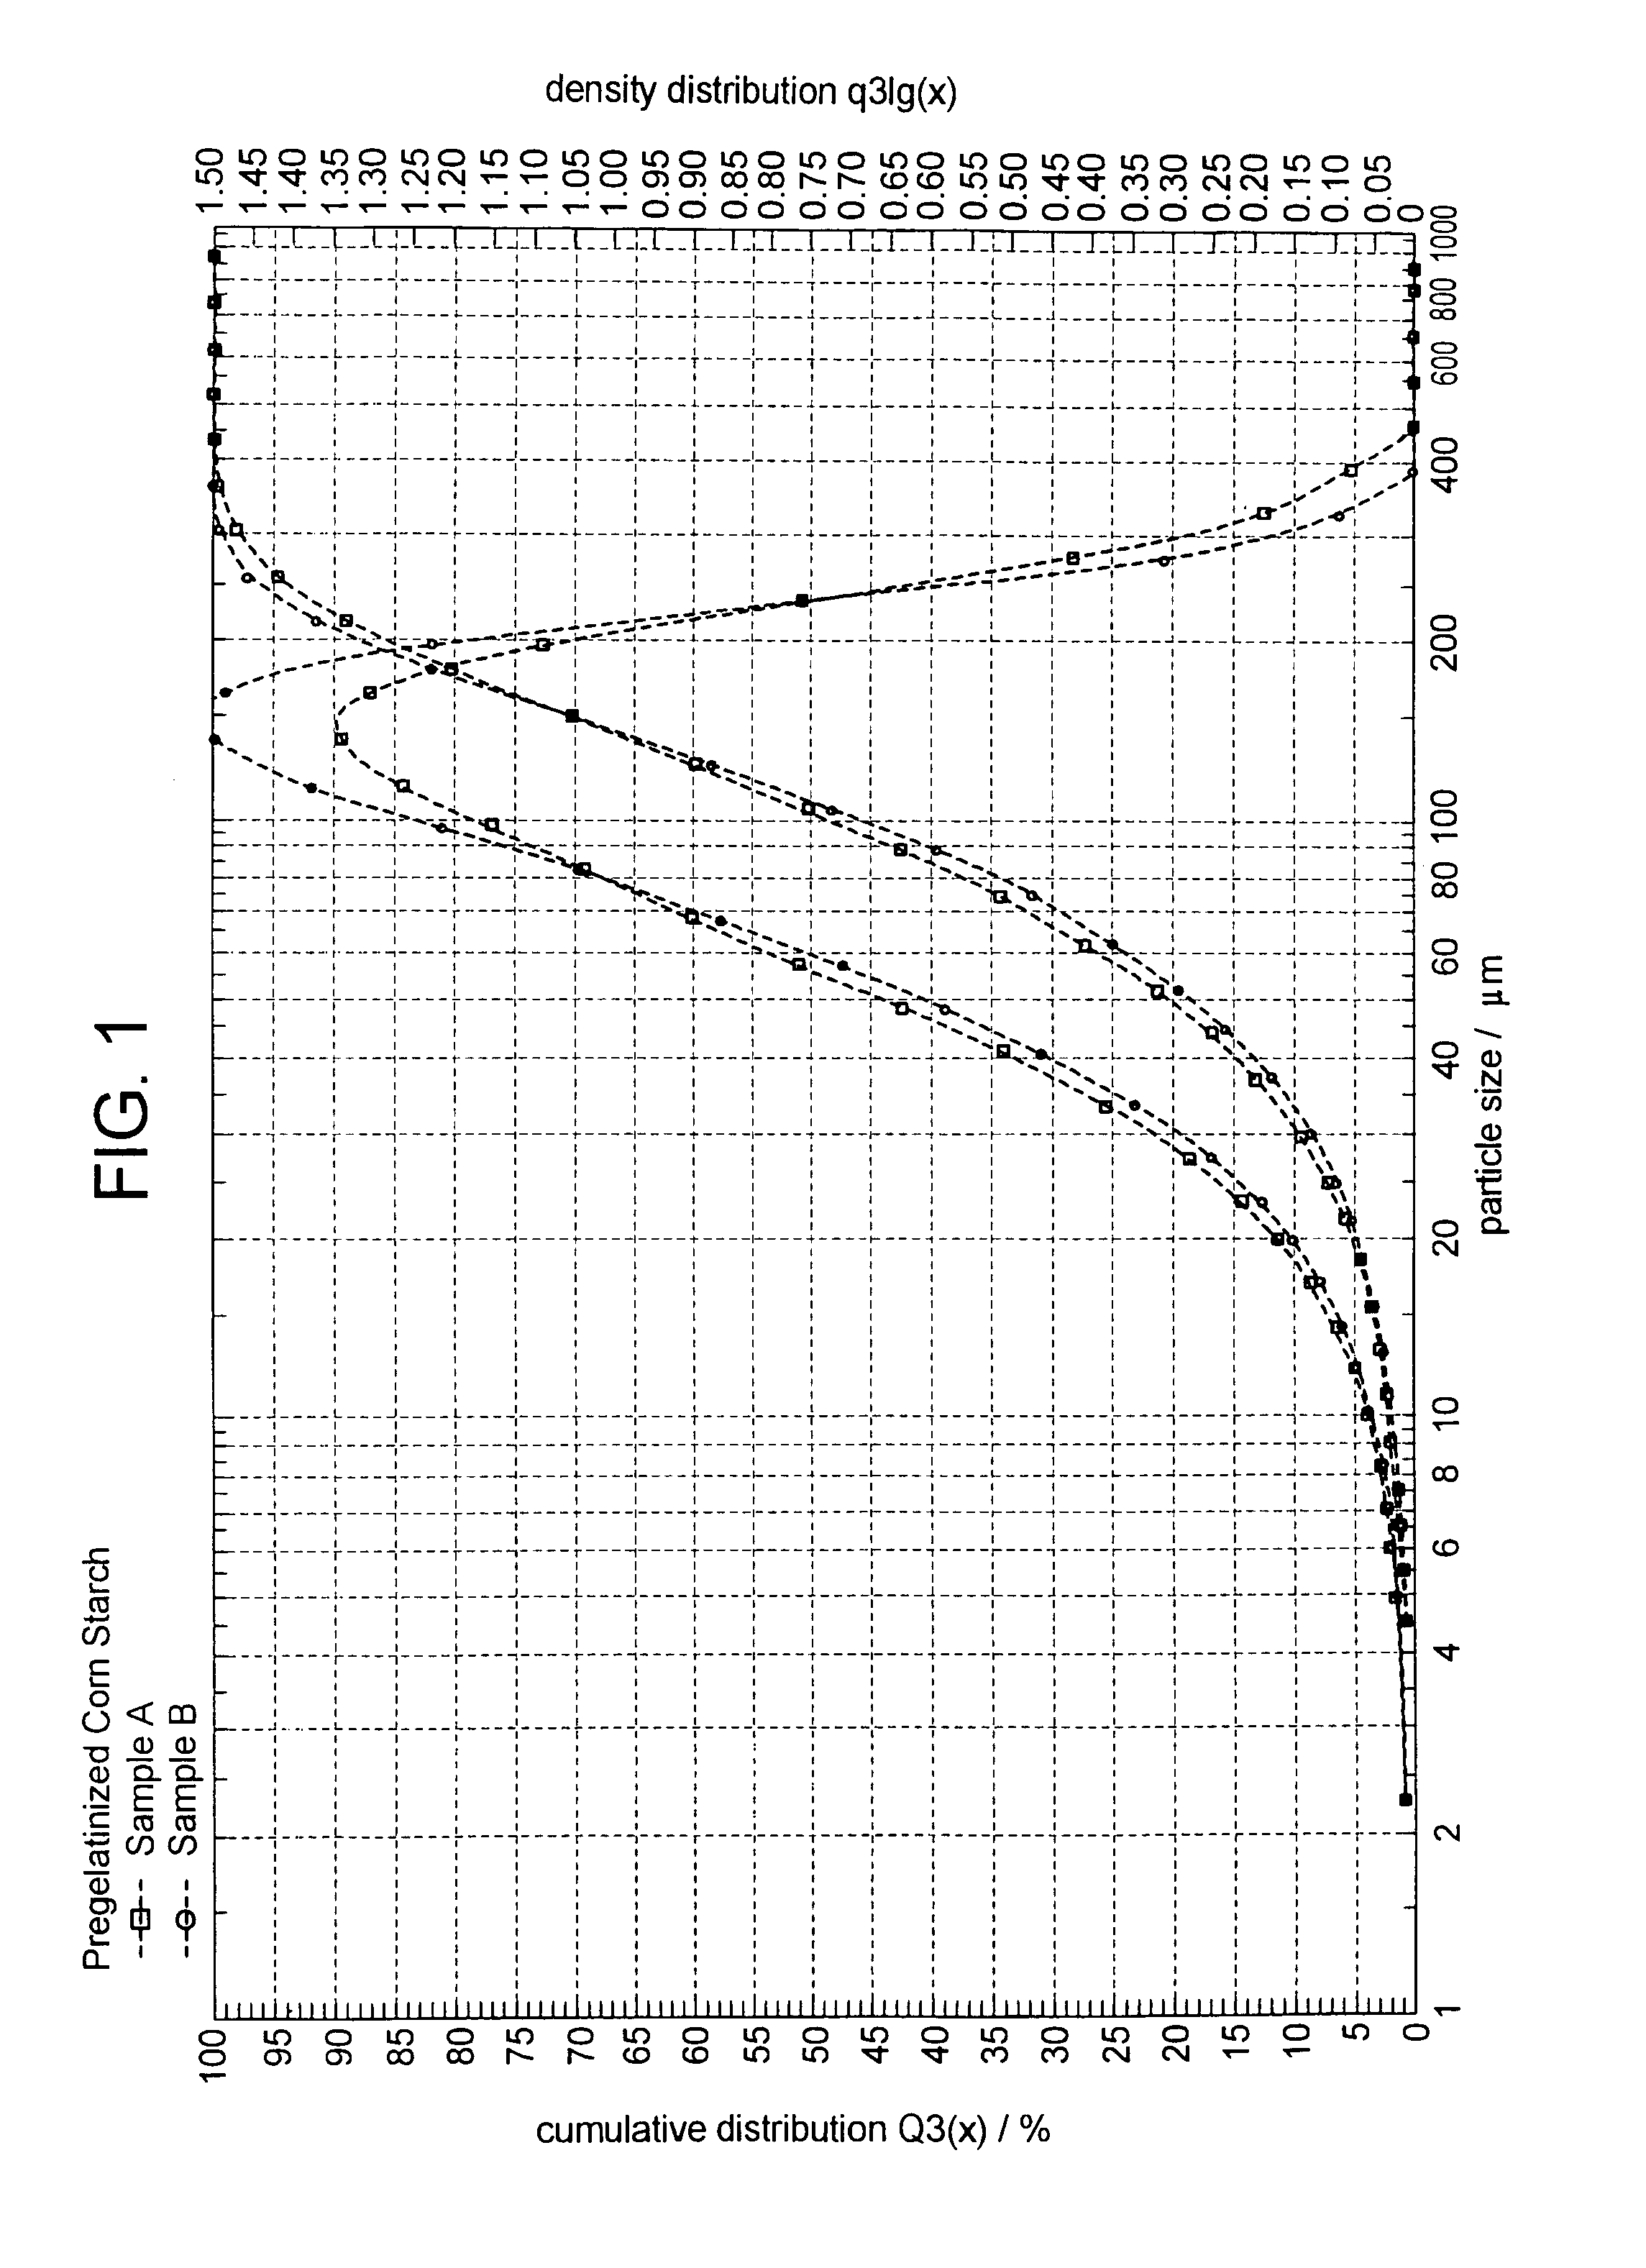 Method of water dispersing pregelatinized starch in making gypsum products